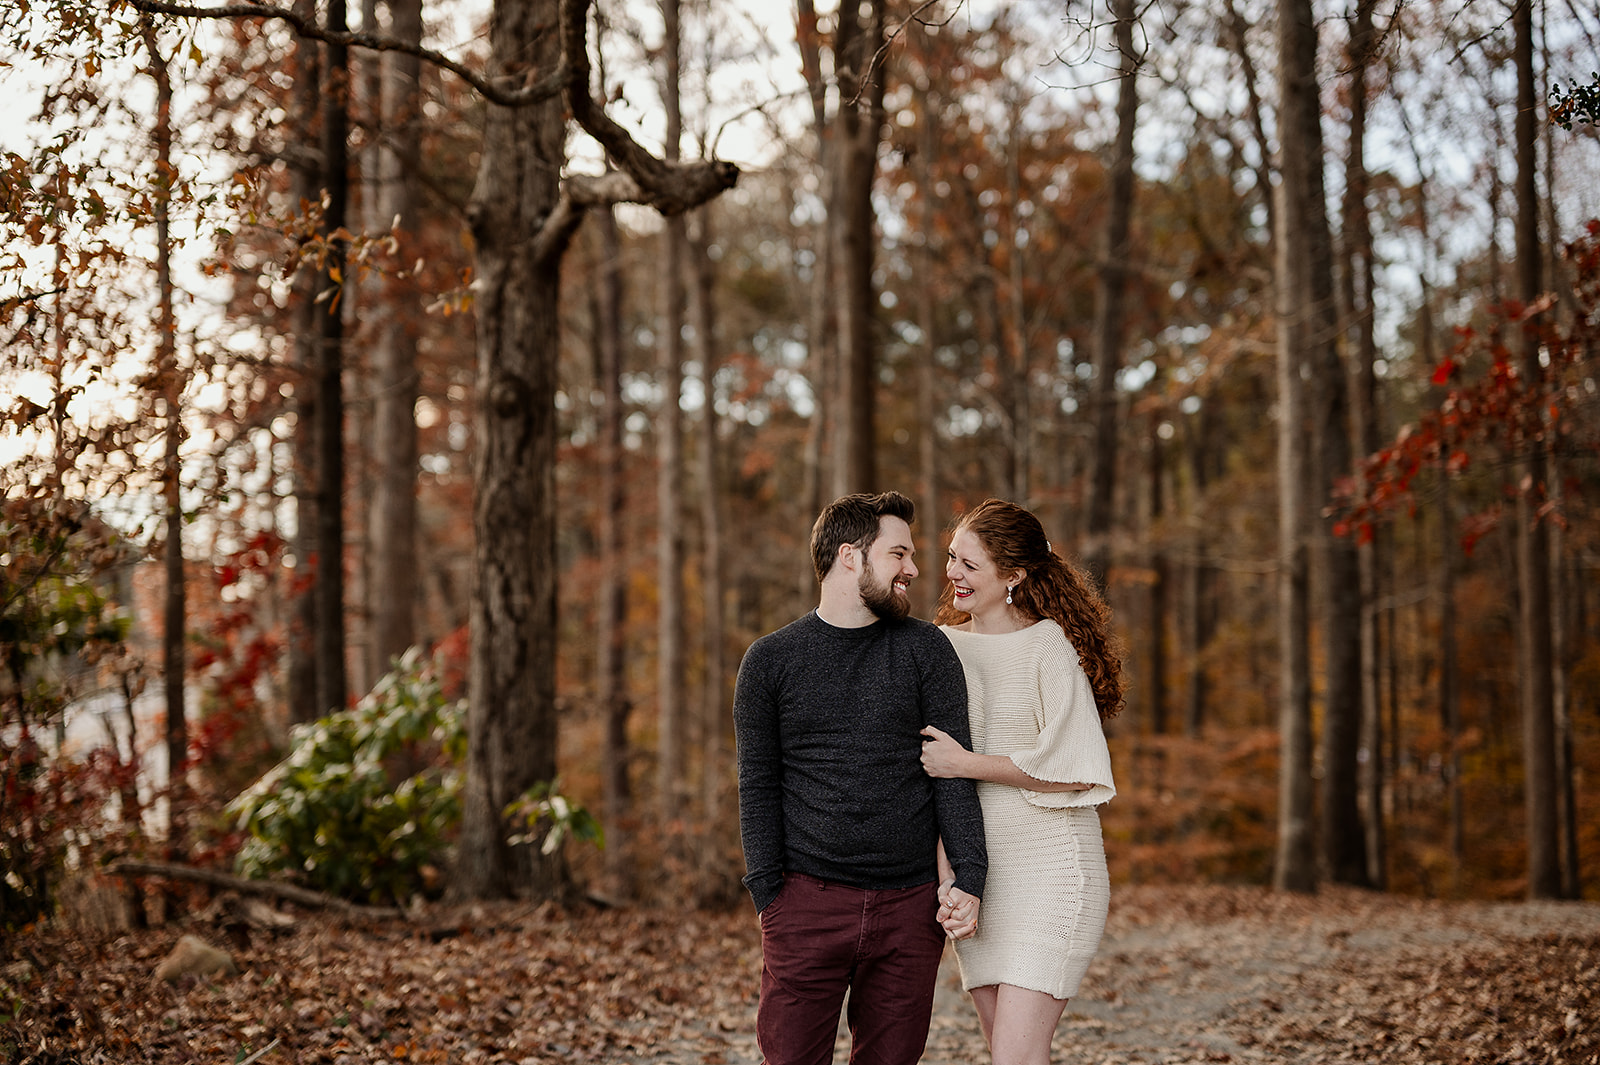 Fall engagement photo outfits